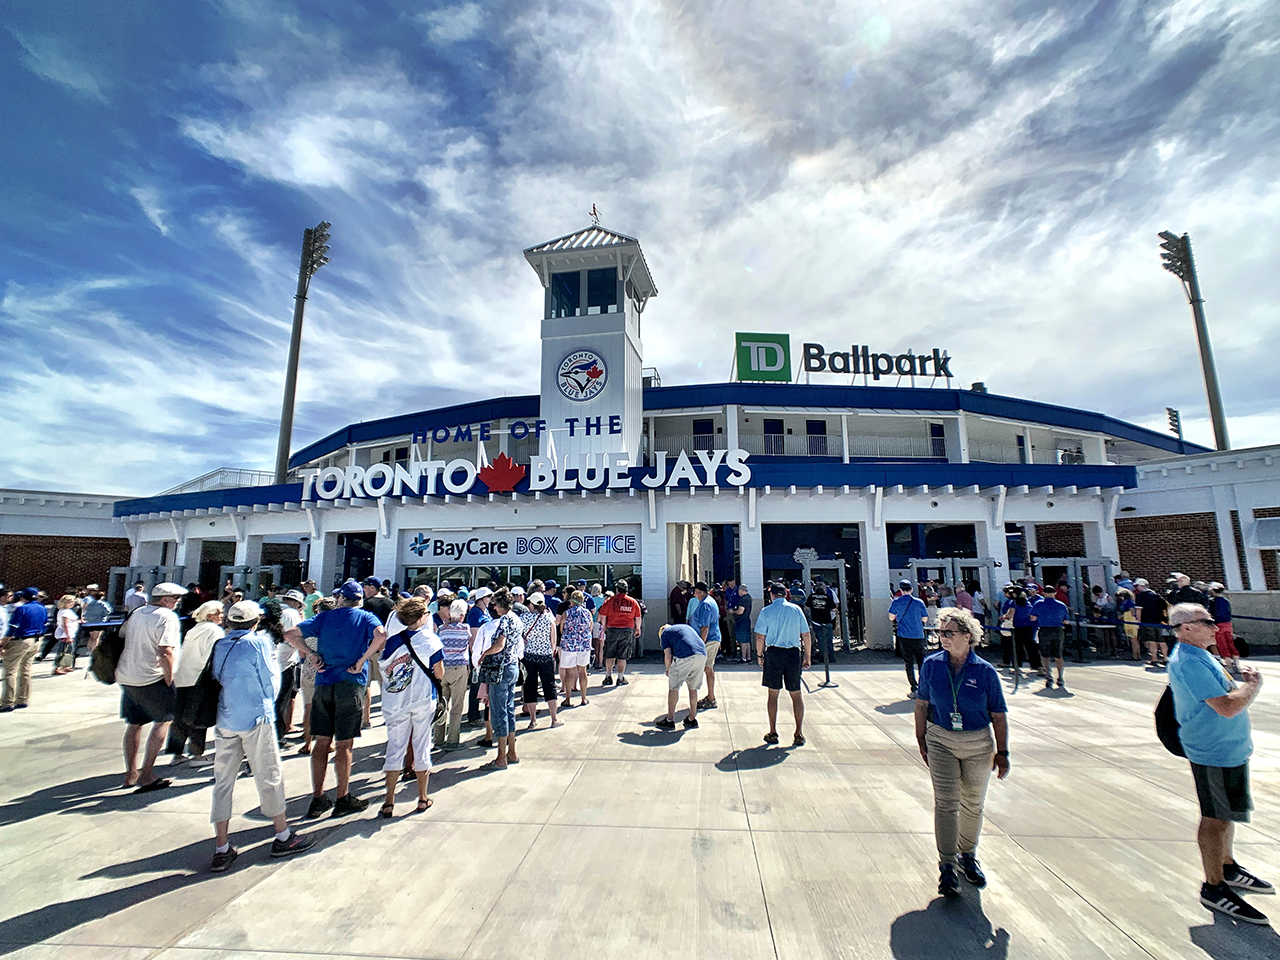 Blue Jays renovations start soon in Dunedin. What about spring training?